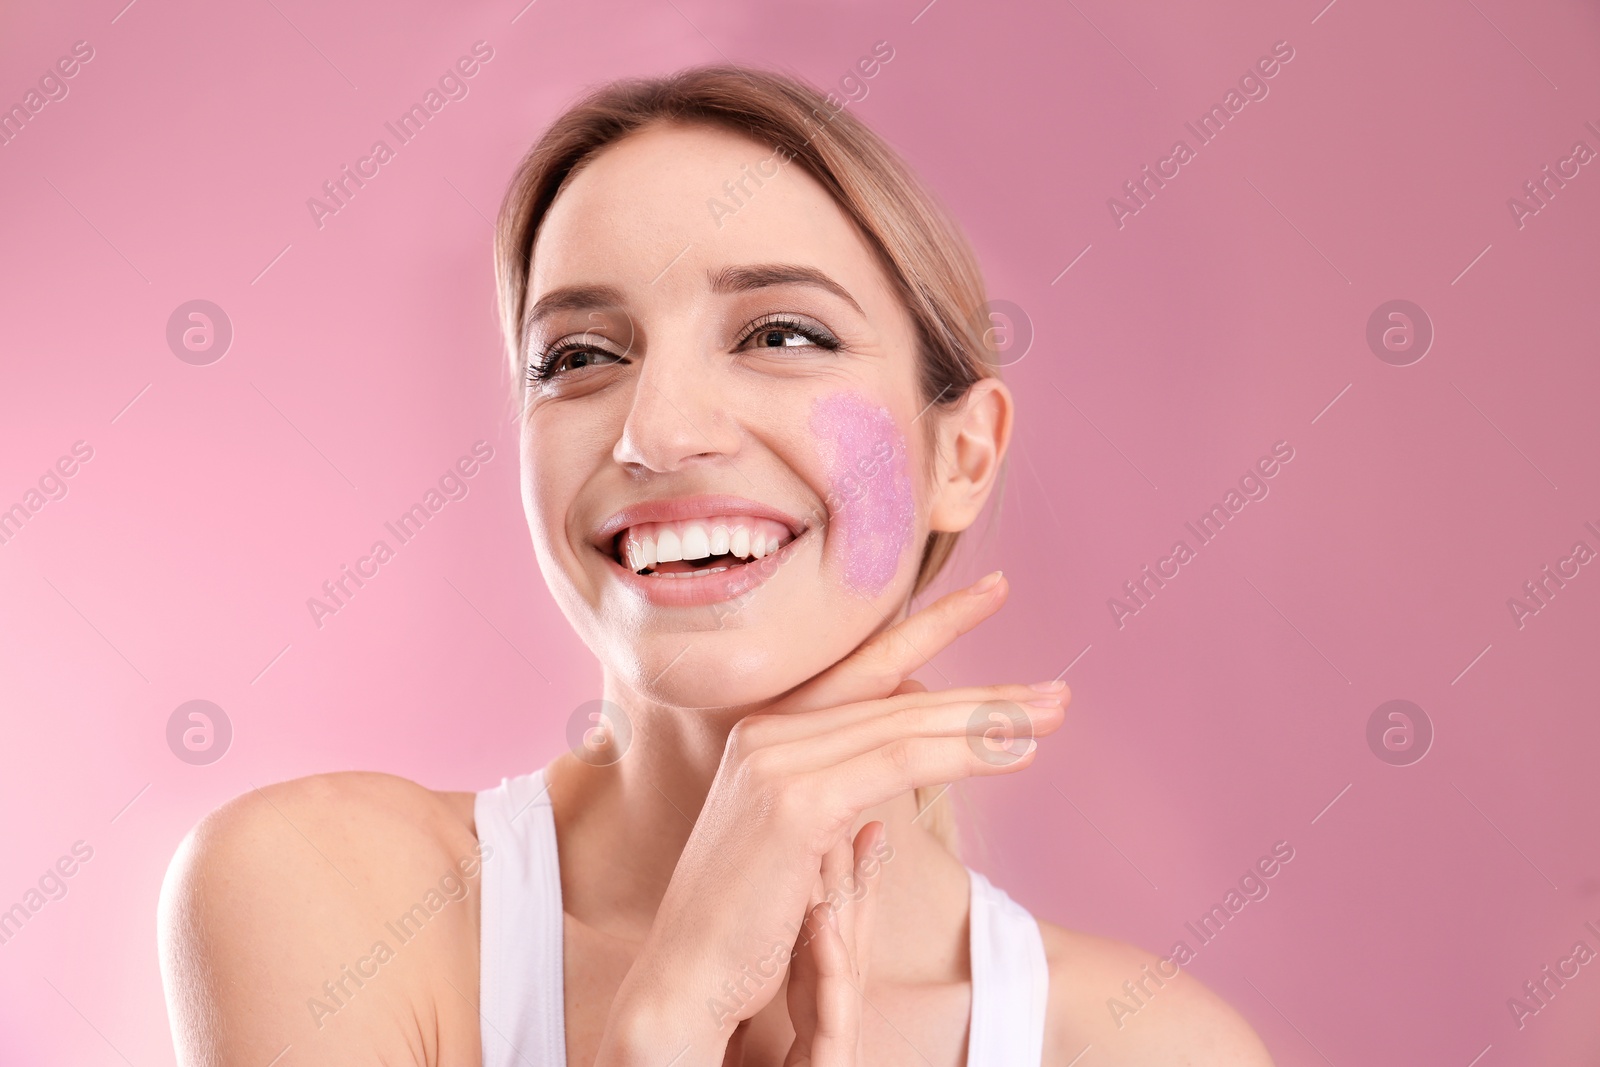 Photo of Young woman applying natural scrub on her face against color background